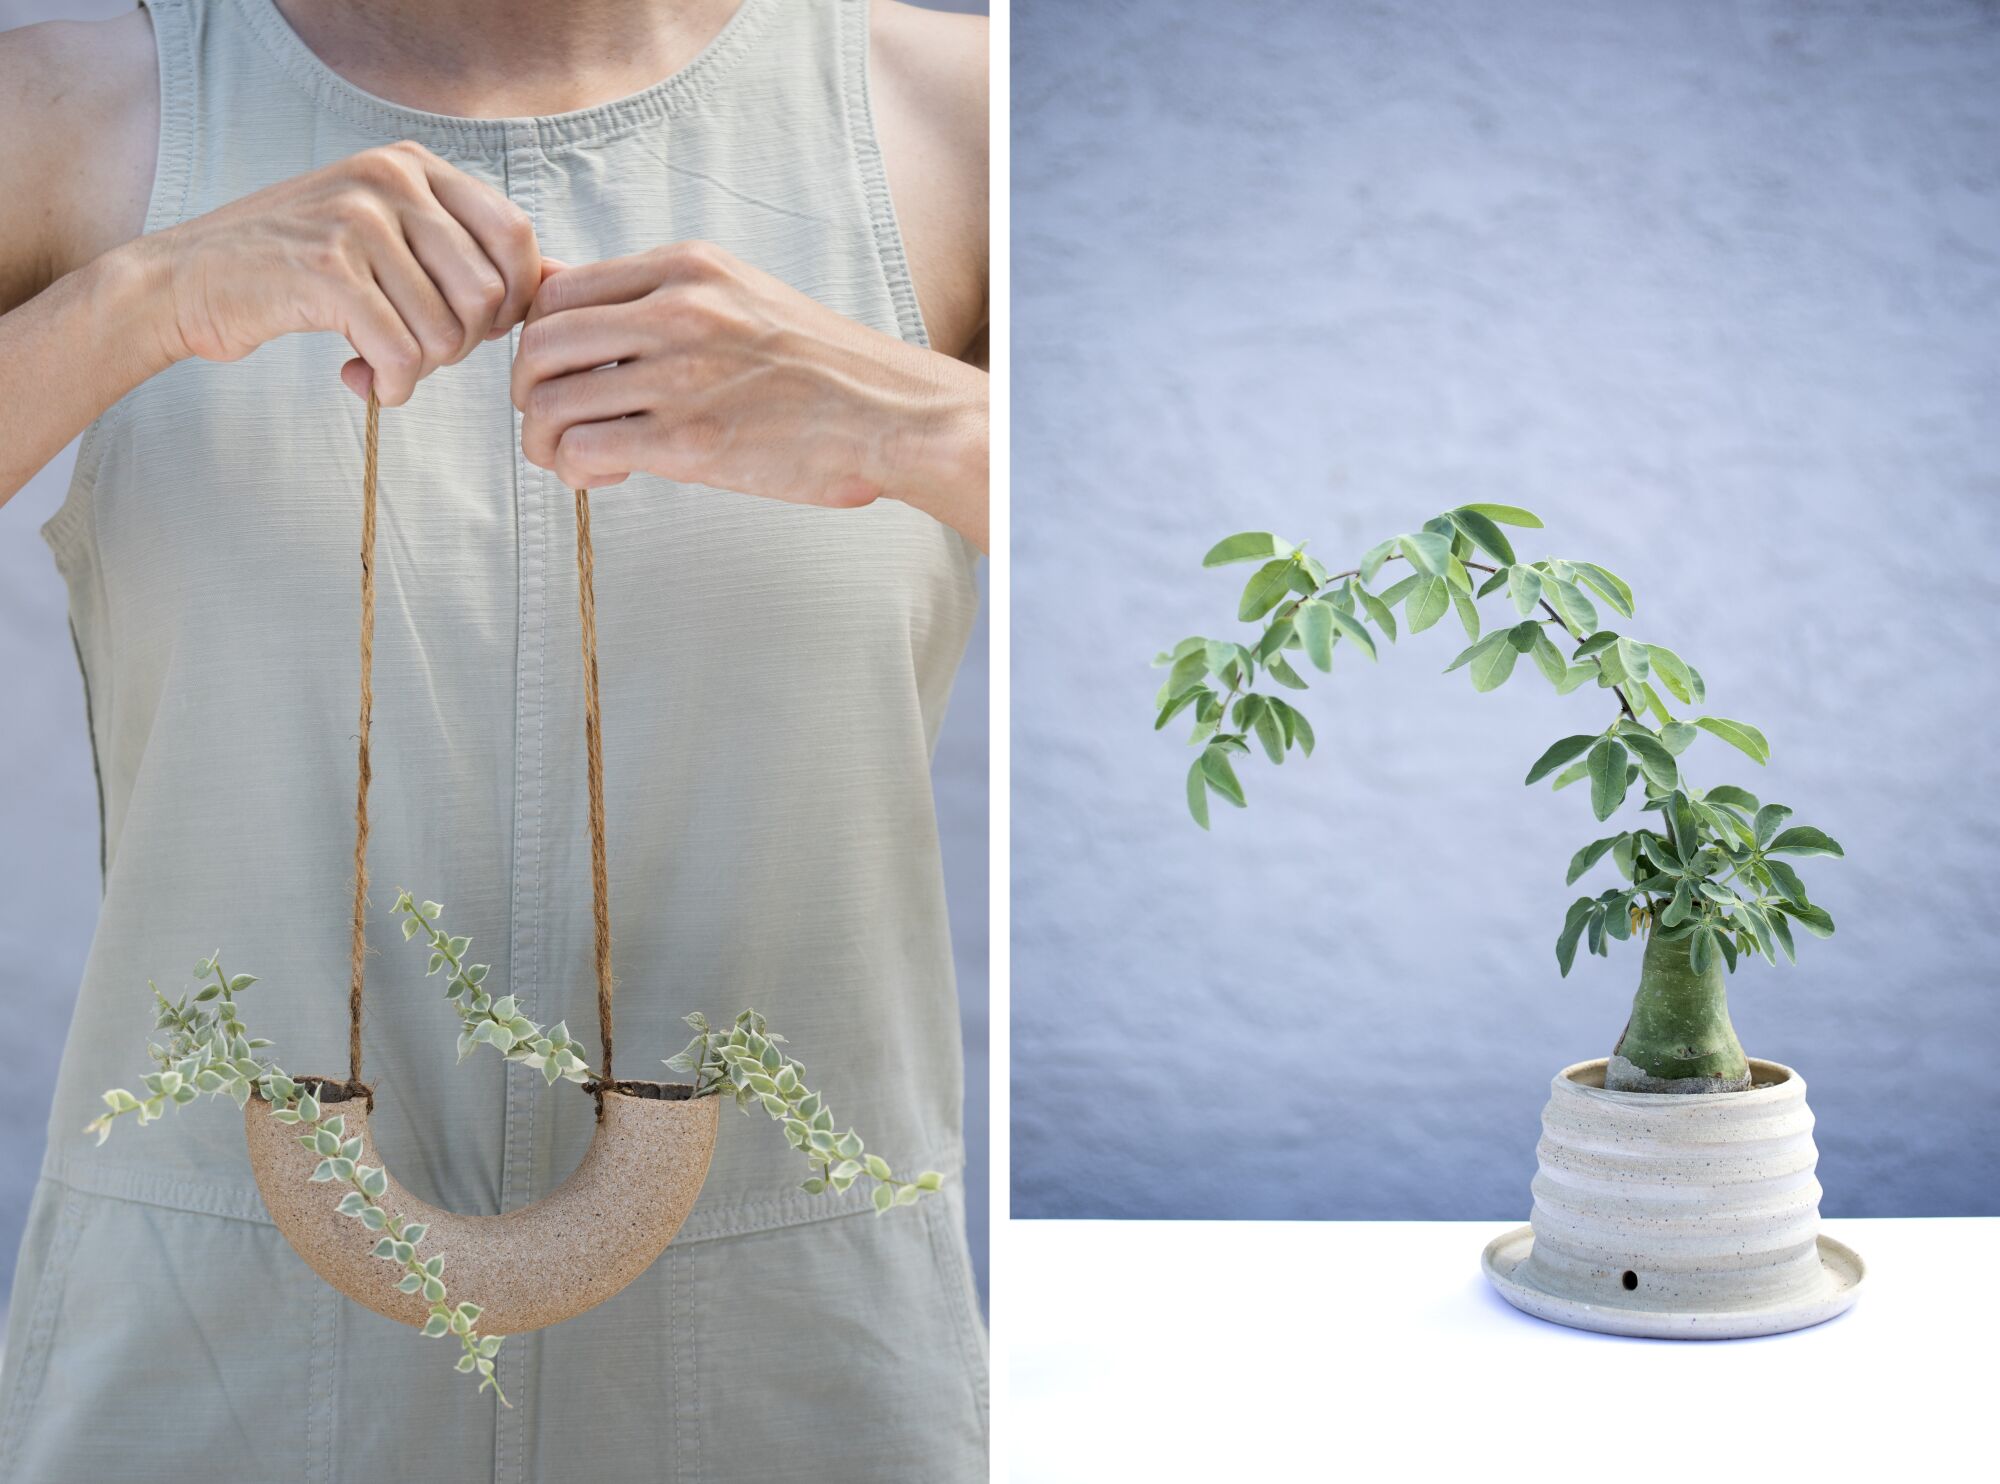 Left, a person holds up a macaroni-shaped planter. Right, another photo of a planter with a plant